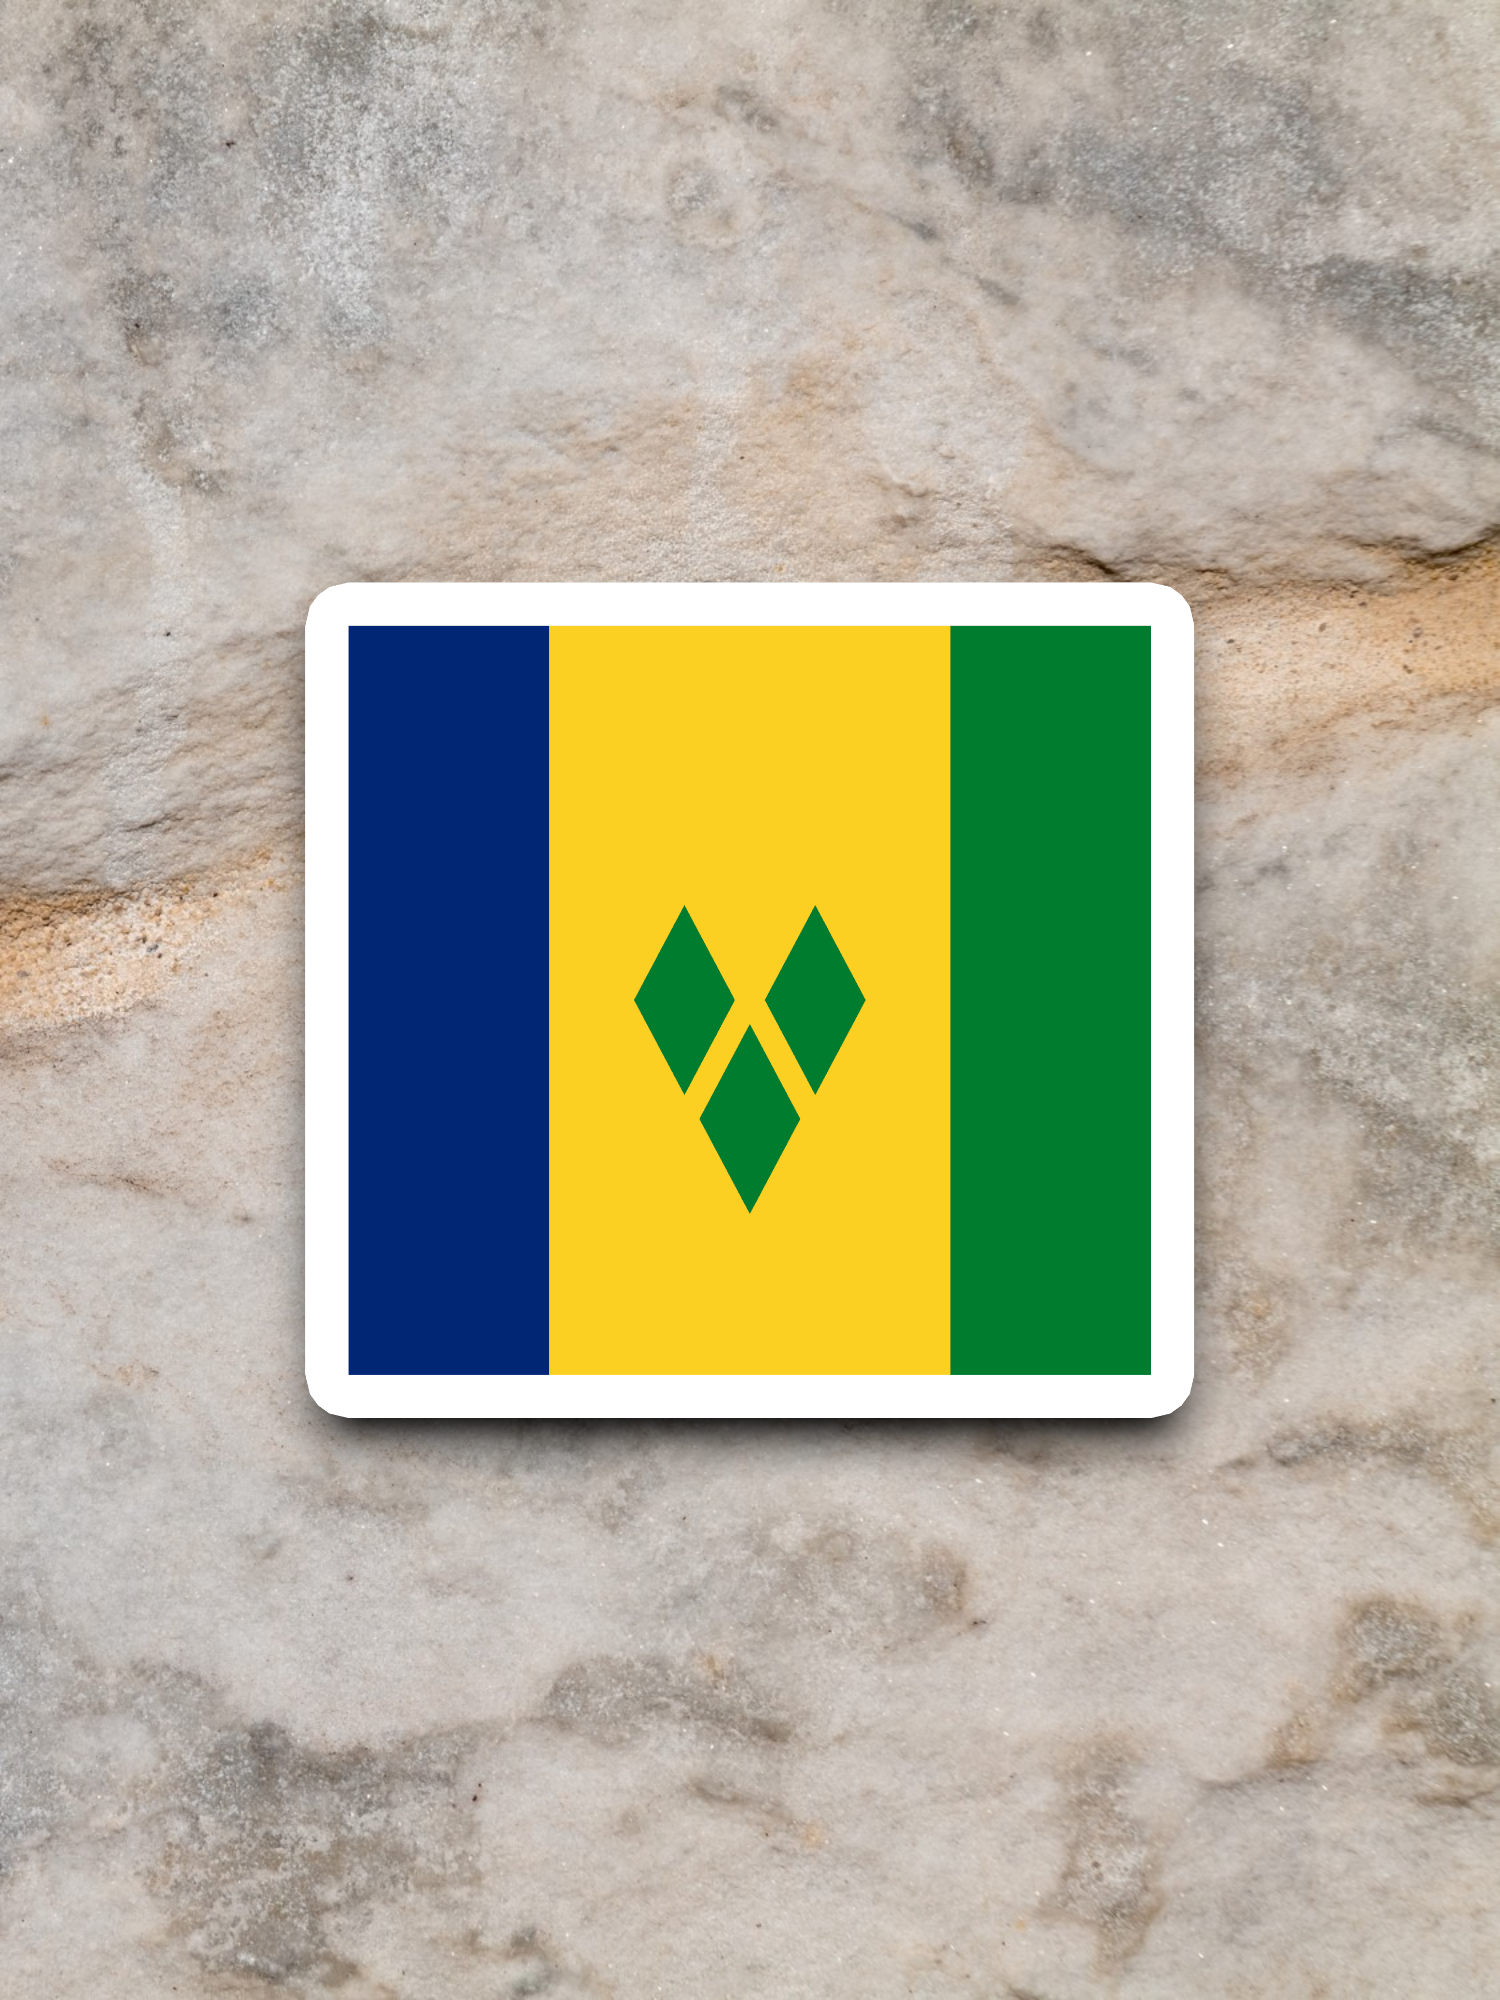 Saint Vincent and the Grenadines Flag - International Country Flag Sticker